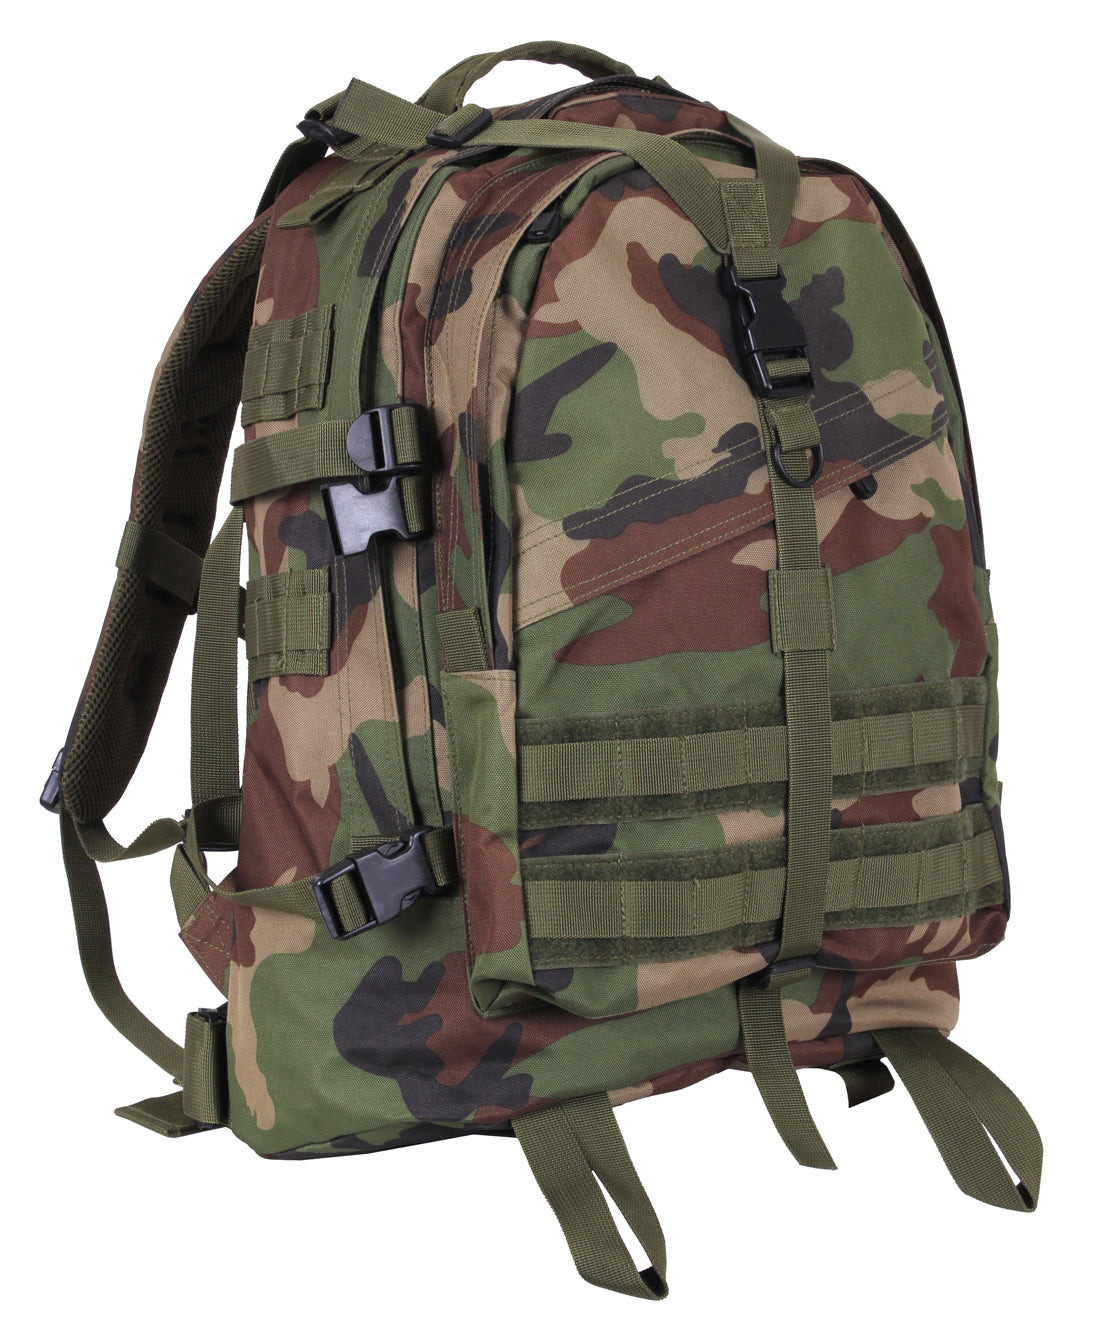 Rothco Large Camo Transport Pack Backpack